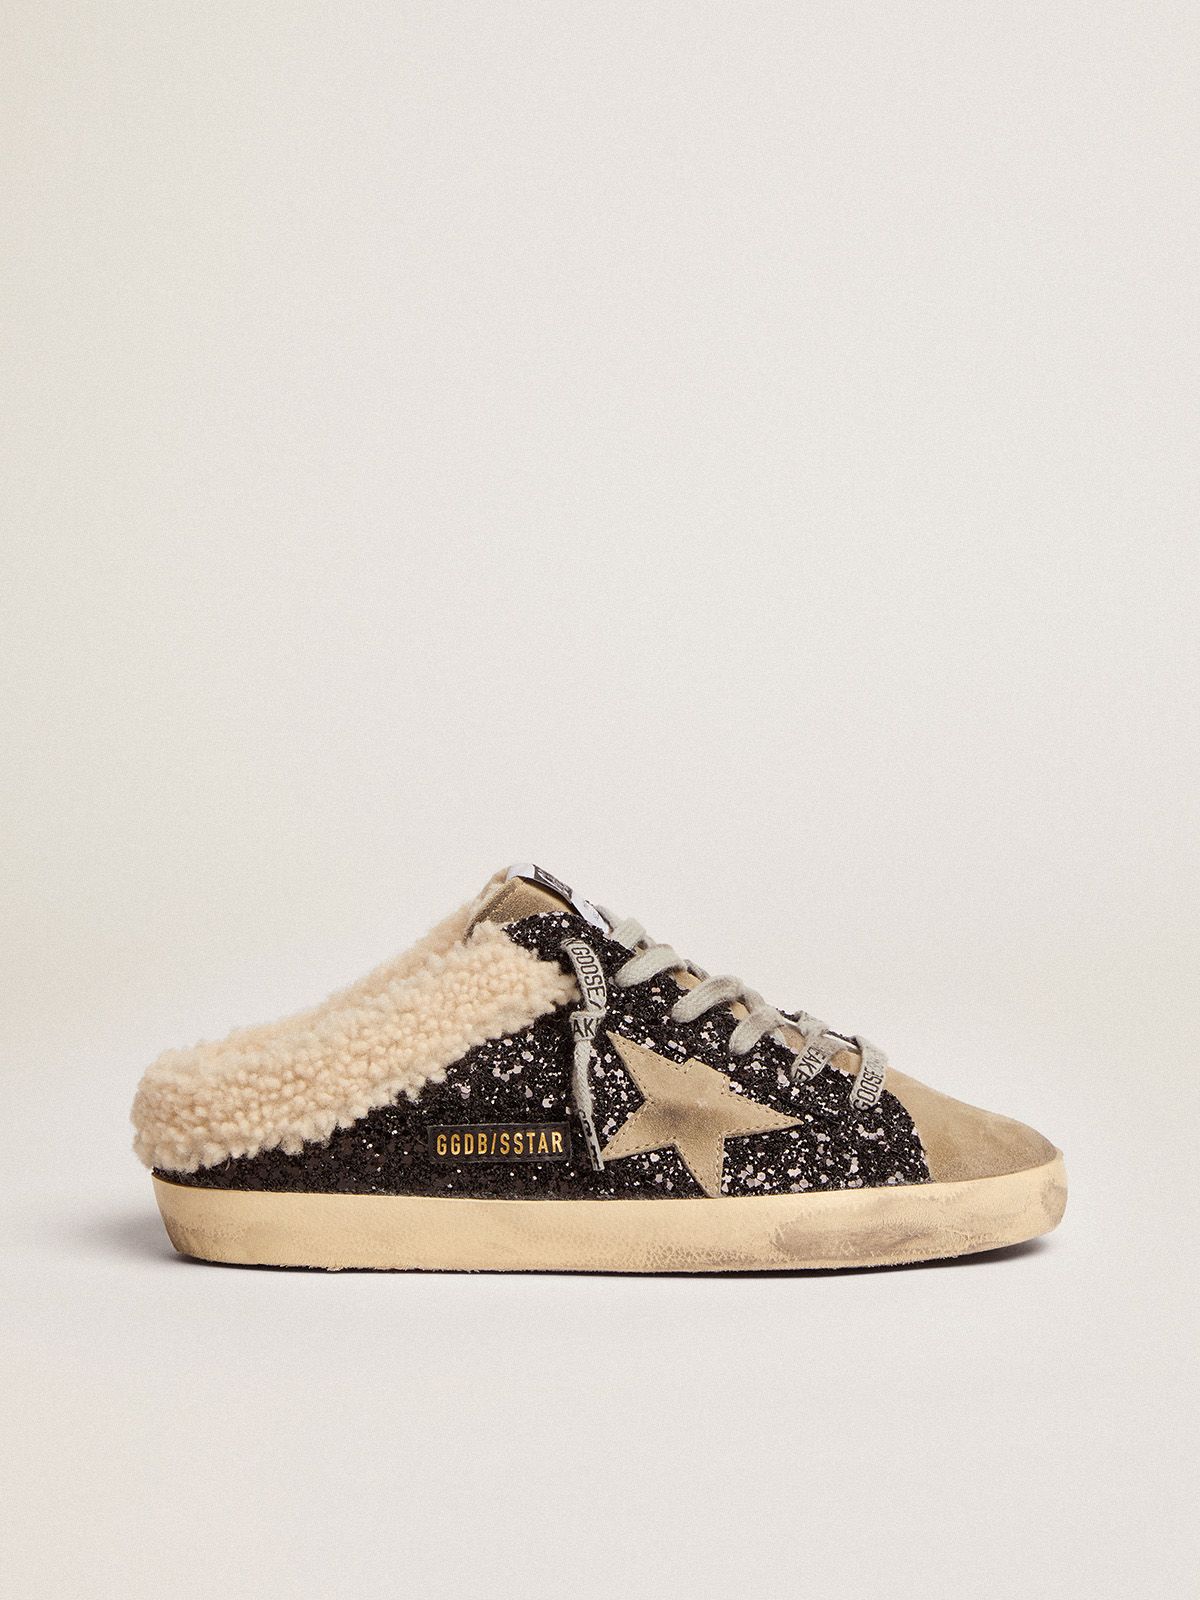 golden goose Super-Star with shearling in Sabots glitter and dove-gray lining LTD star black suede